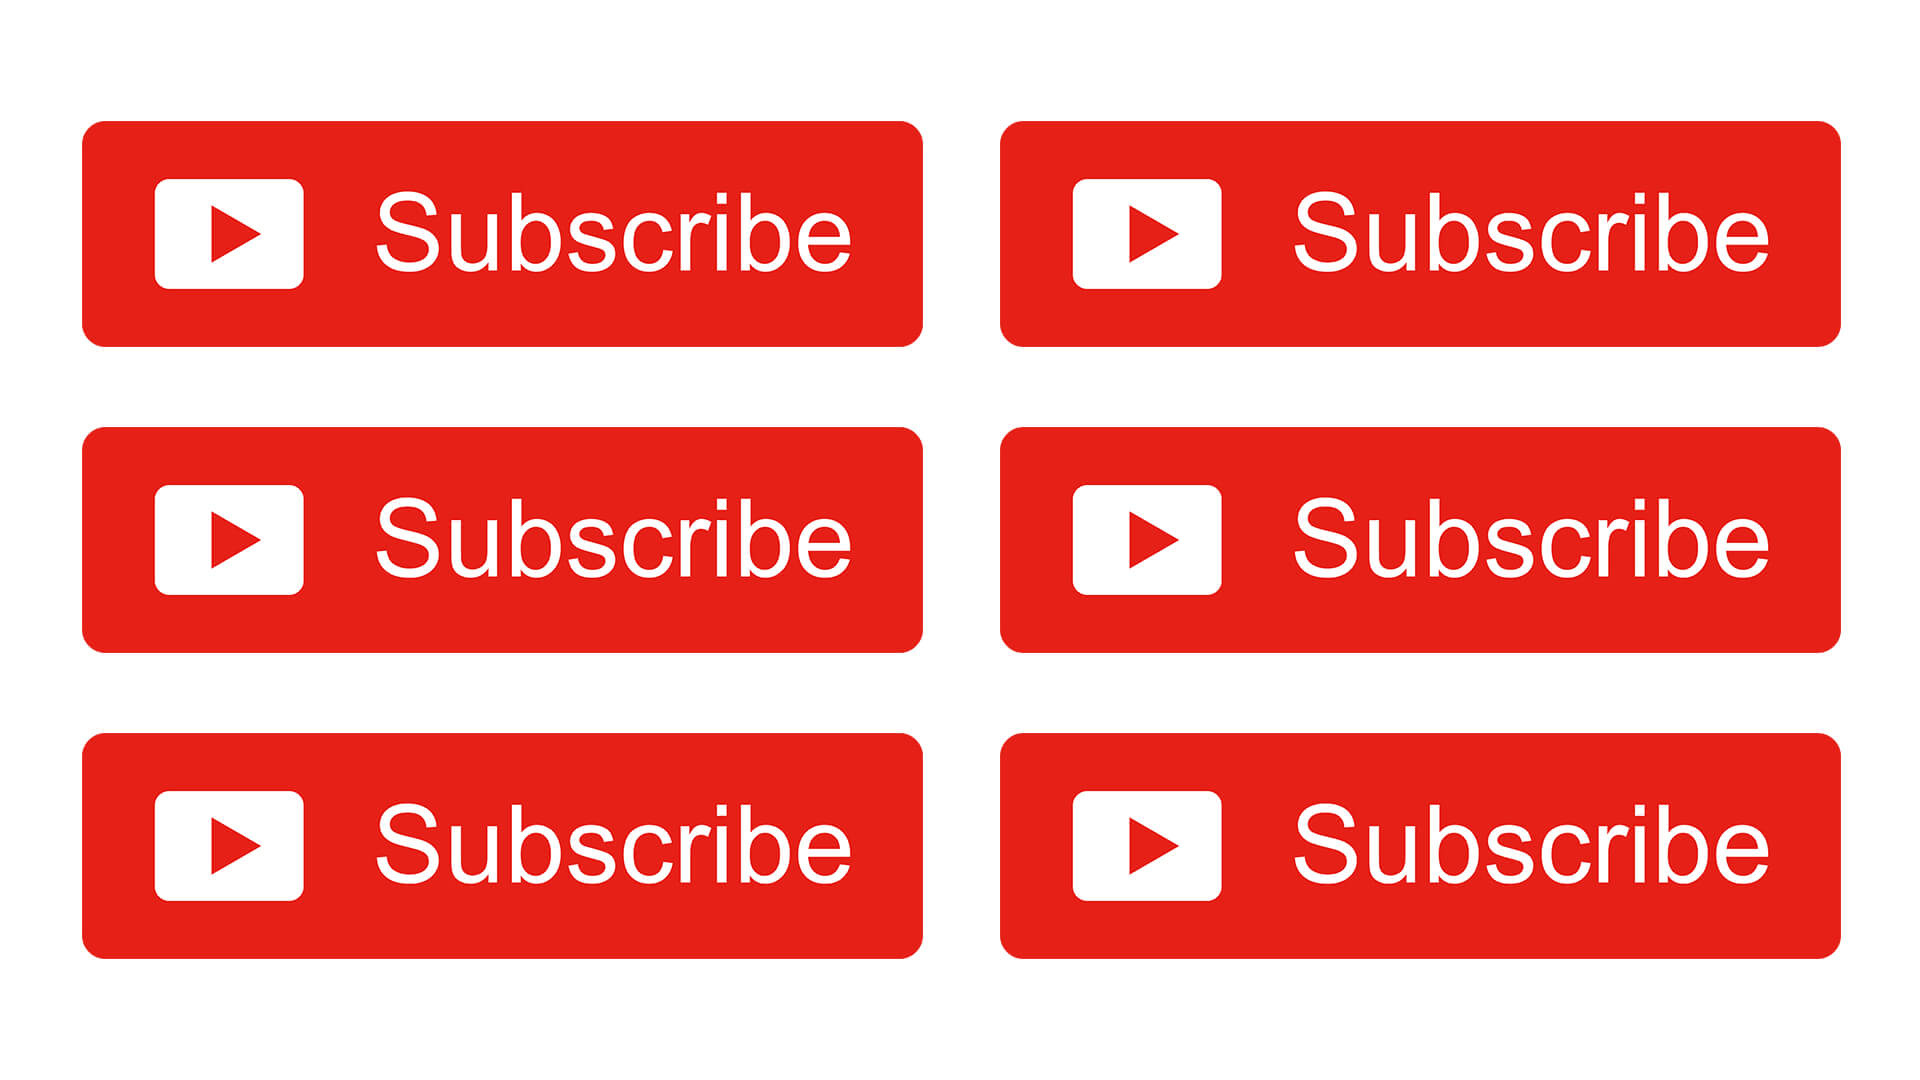 Free YouTube Subscribe Button Download Design Inspiration By AlfredoCreates 16 1